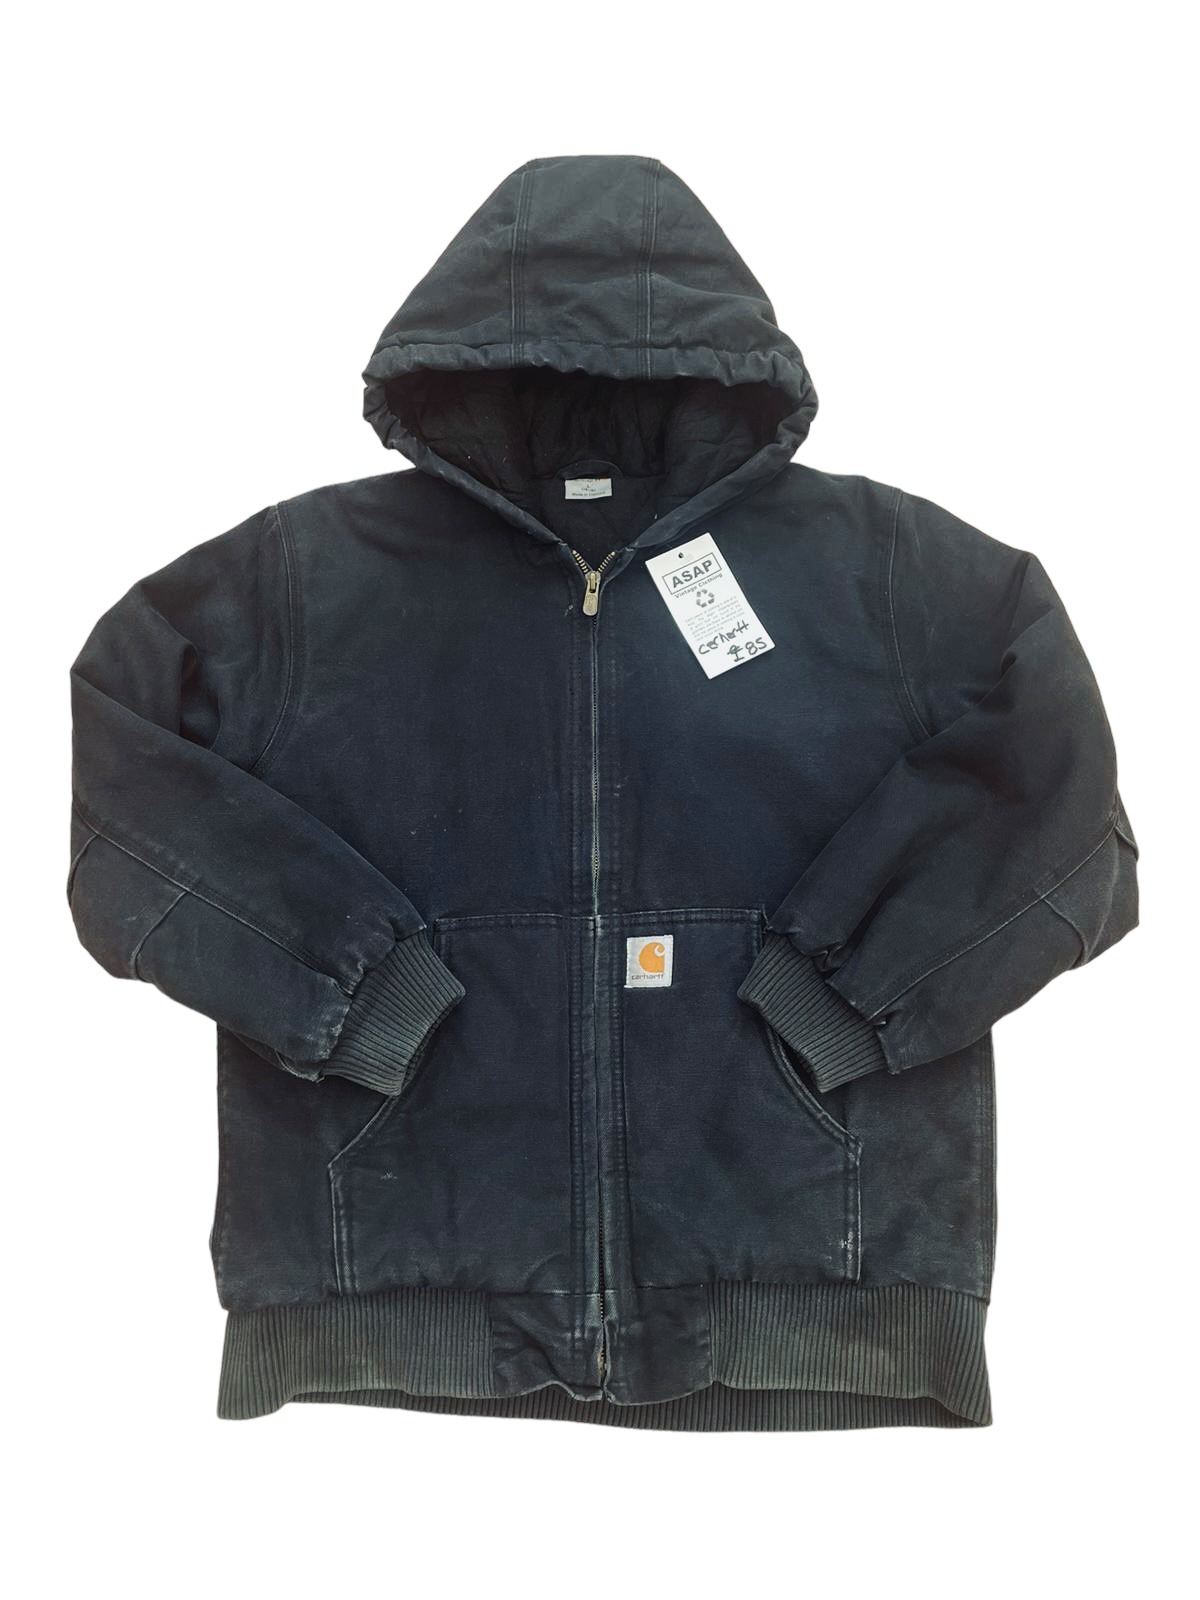 Carhartt reworked jackets in store - ASAP Vintage Clothing